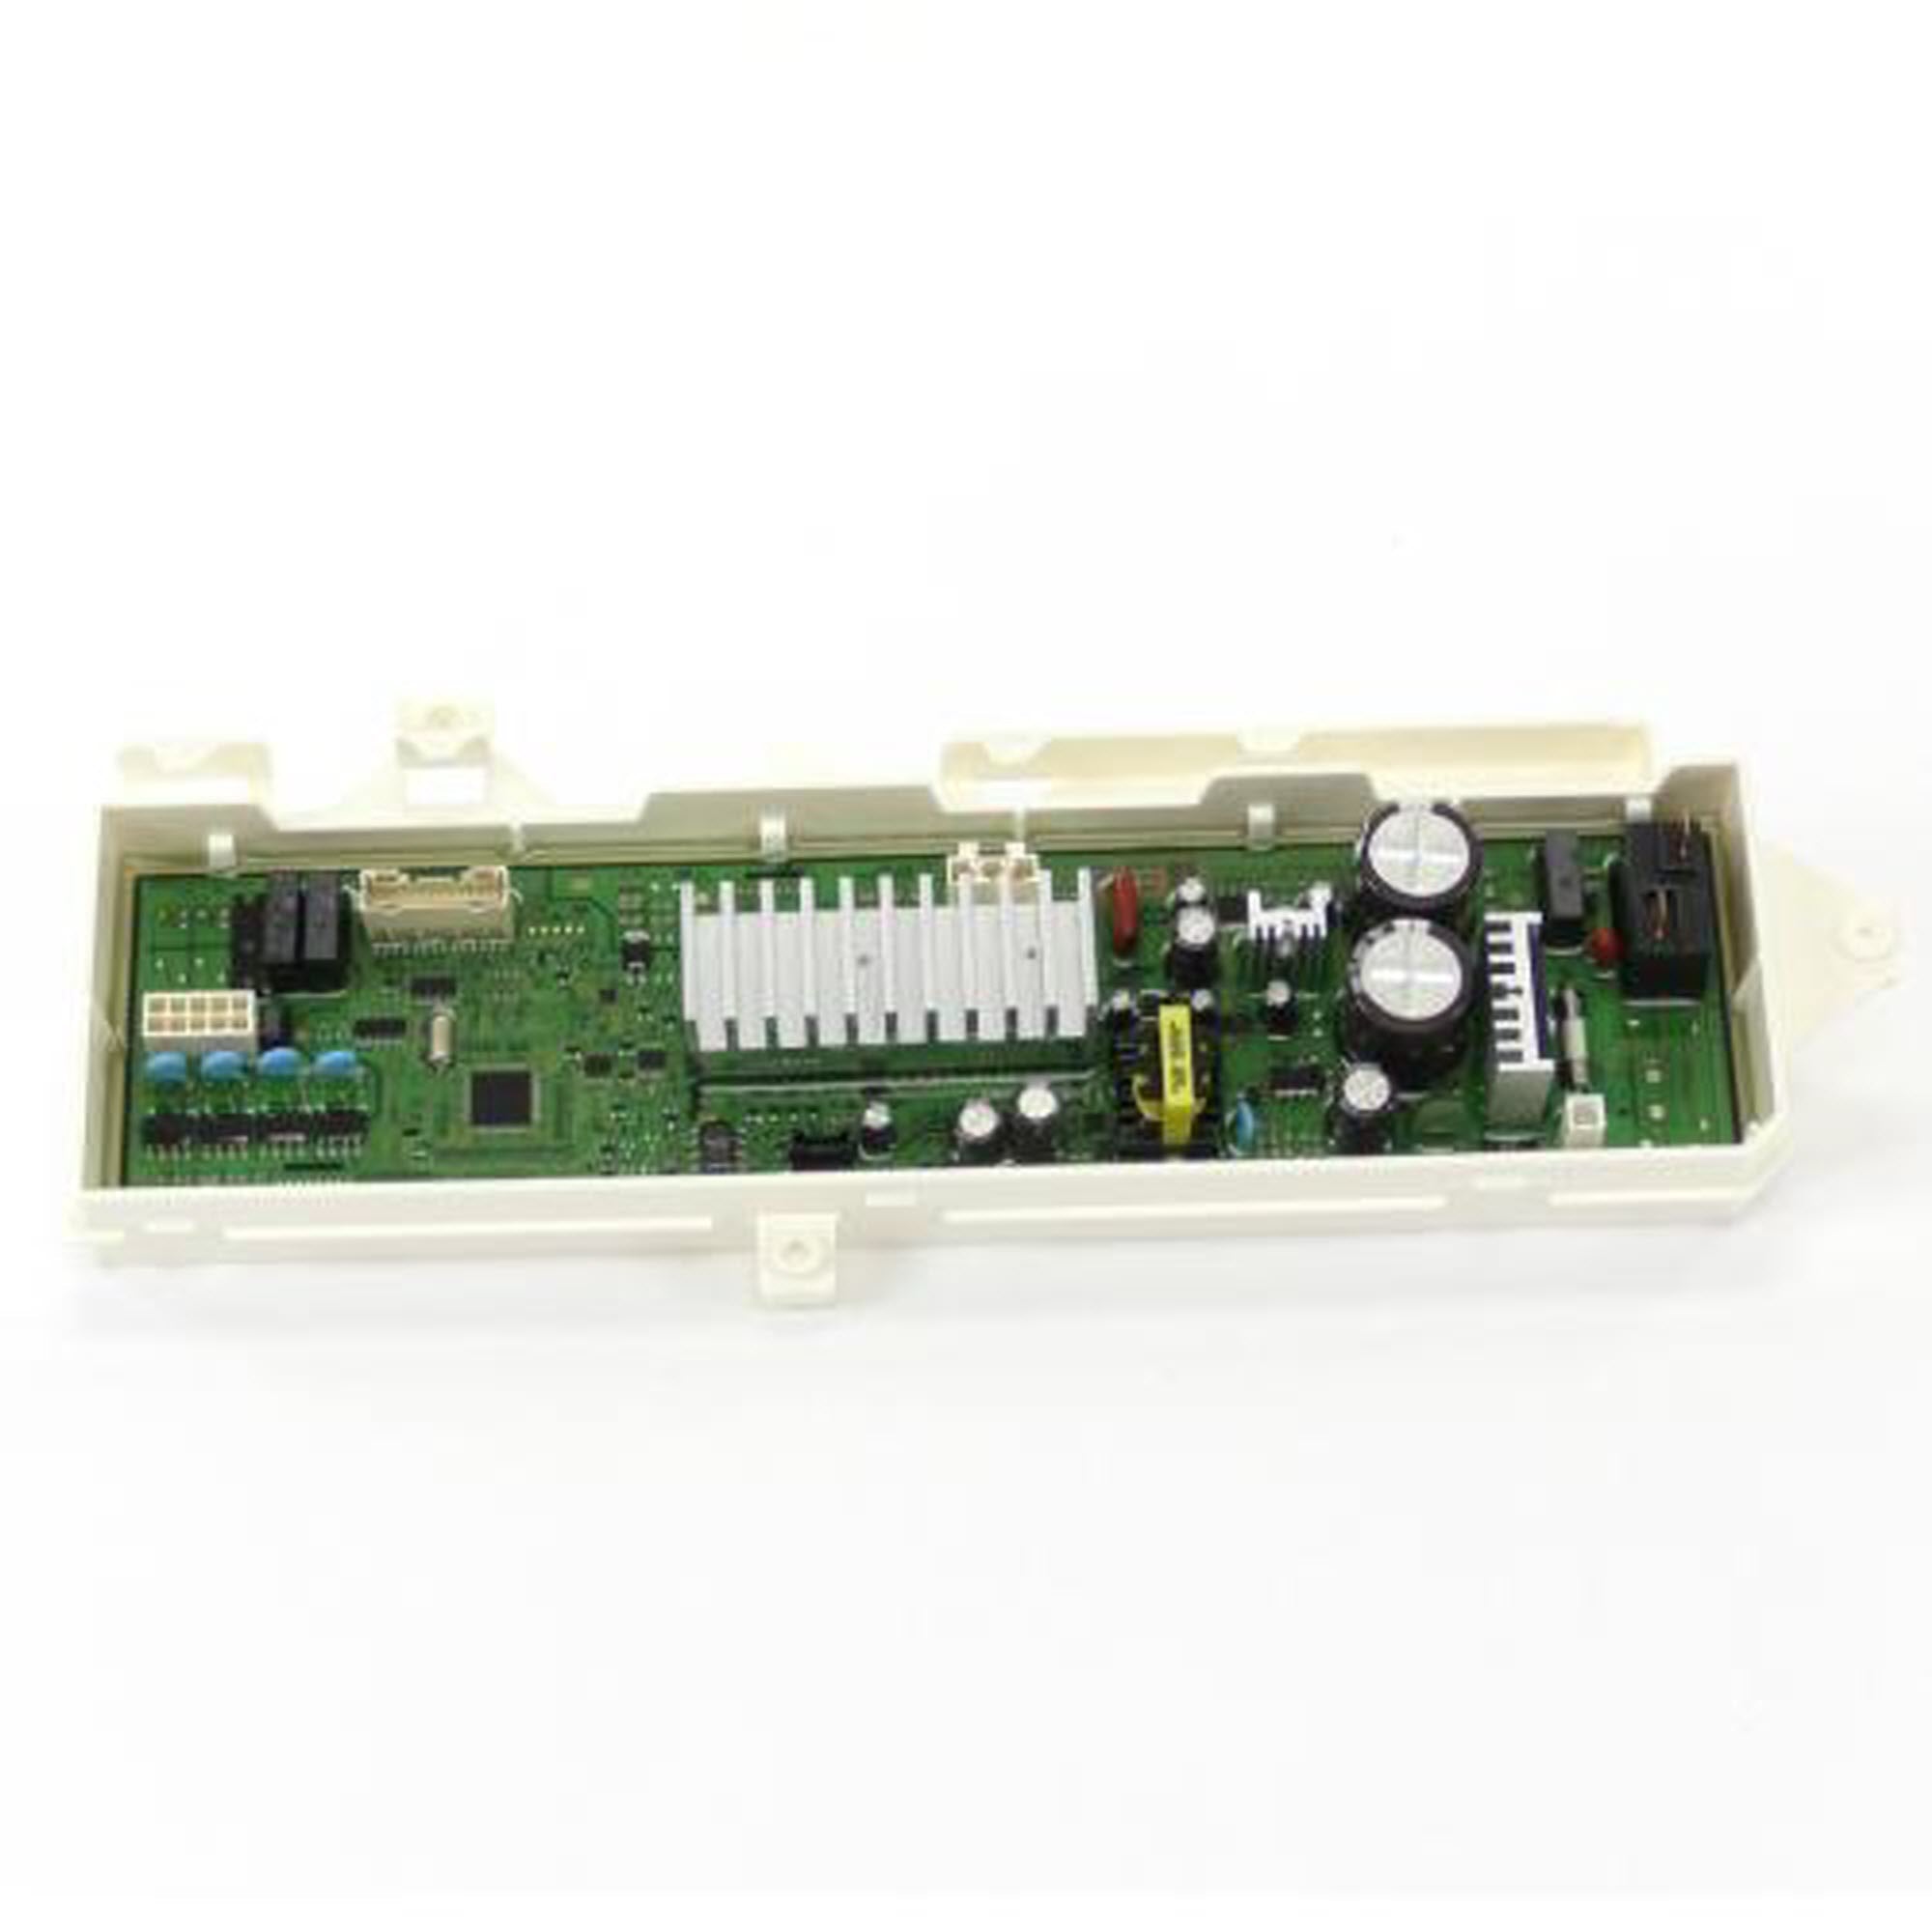 Samsung DC92-02393G Washer Electronic Control Board